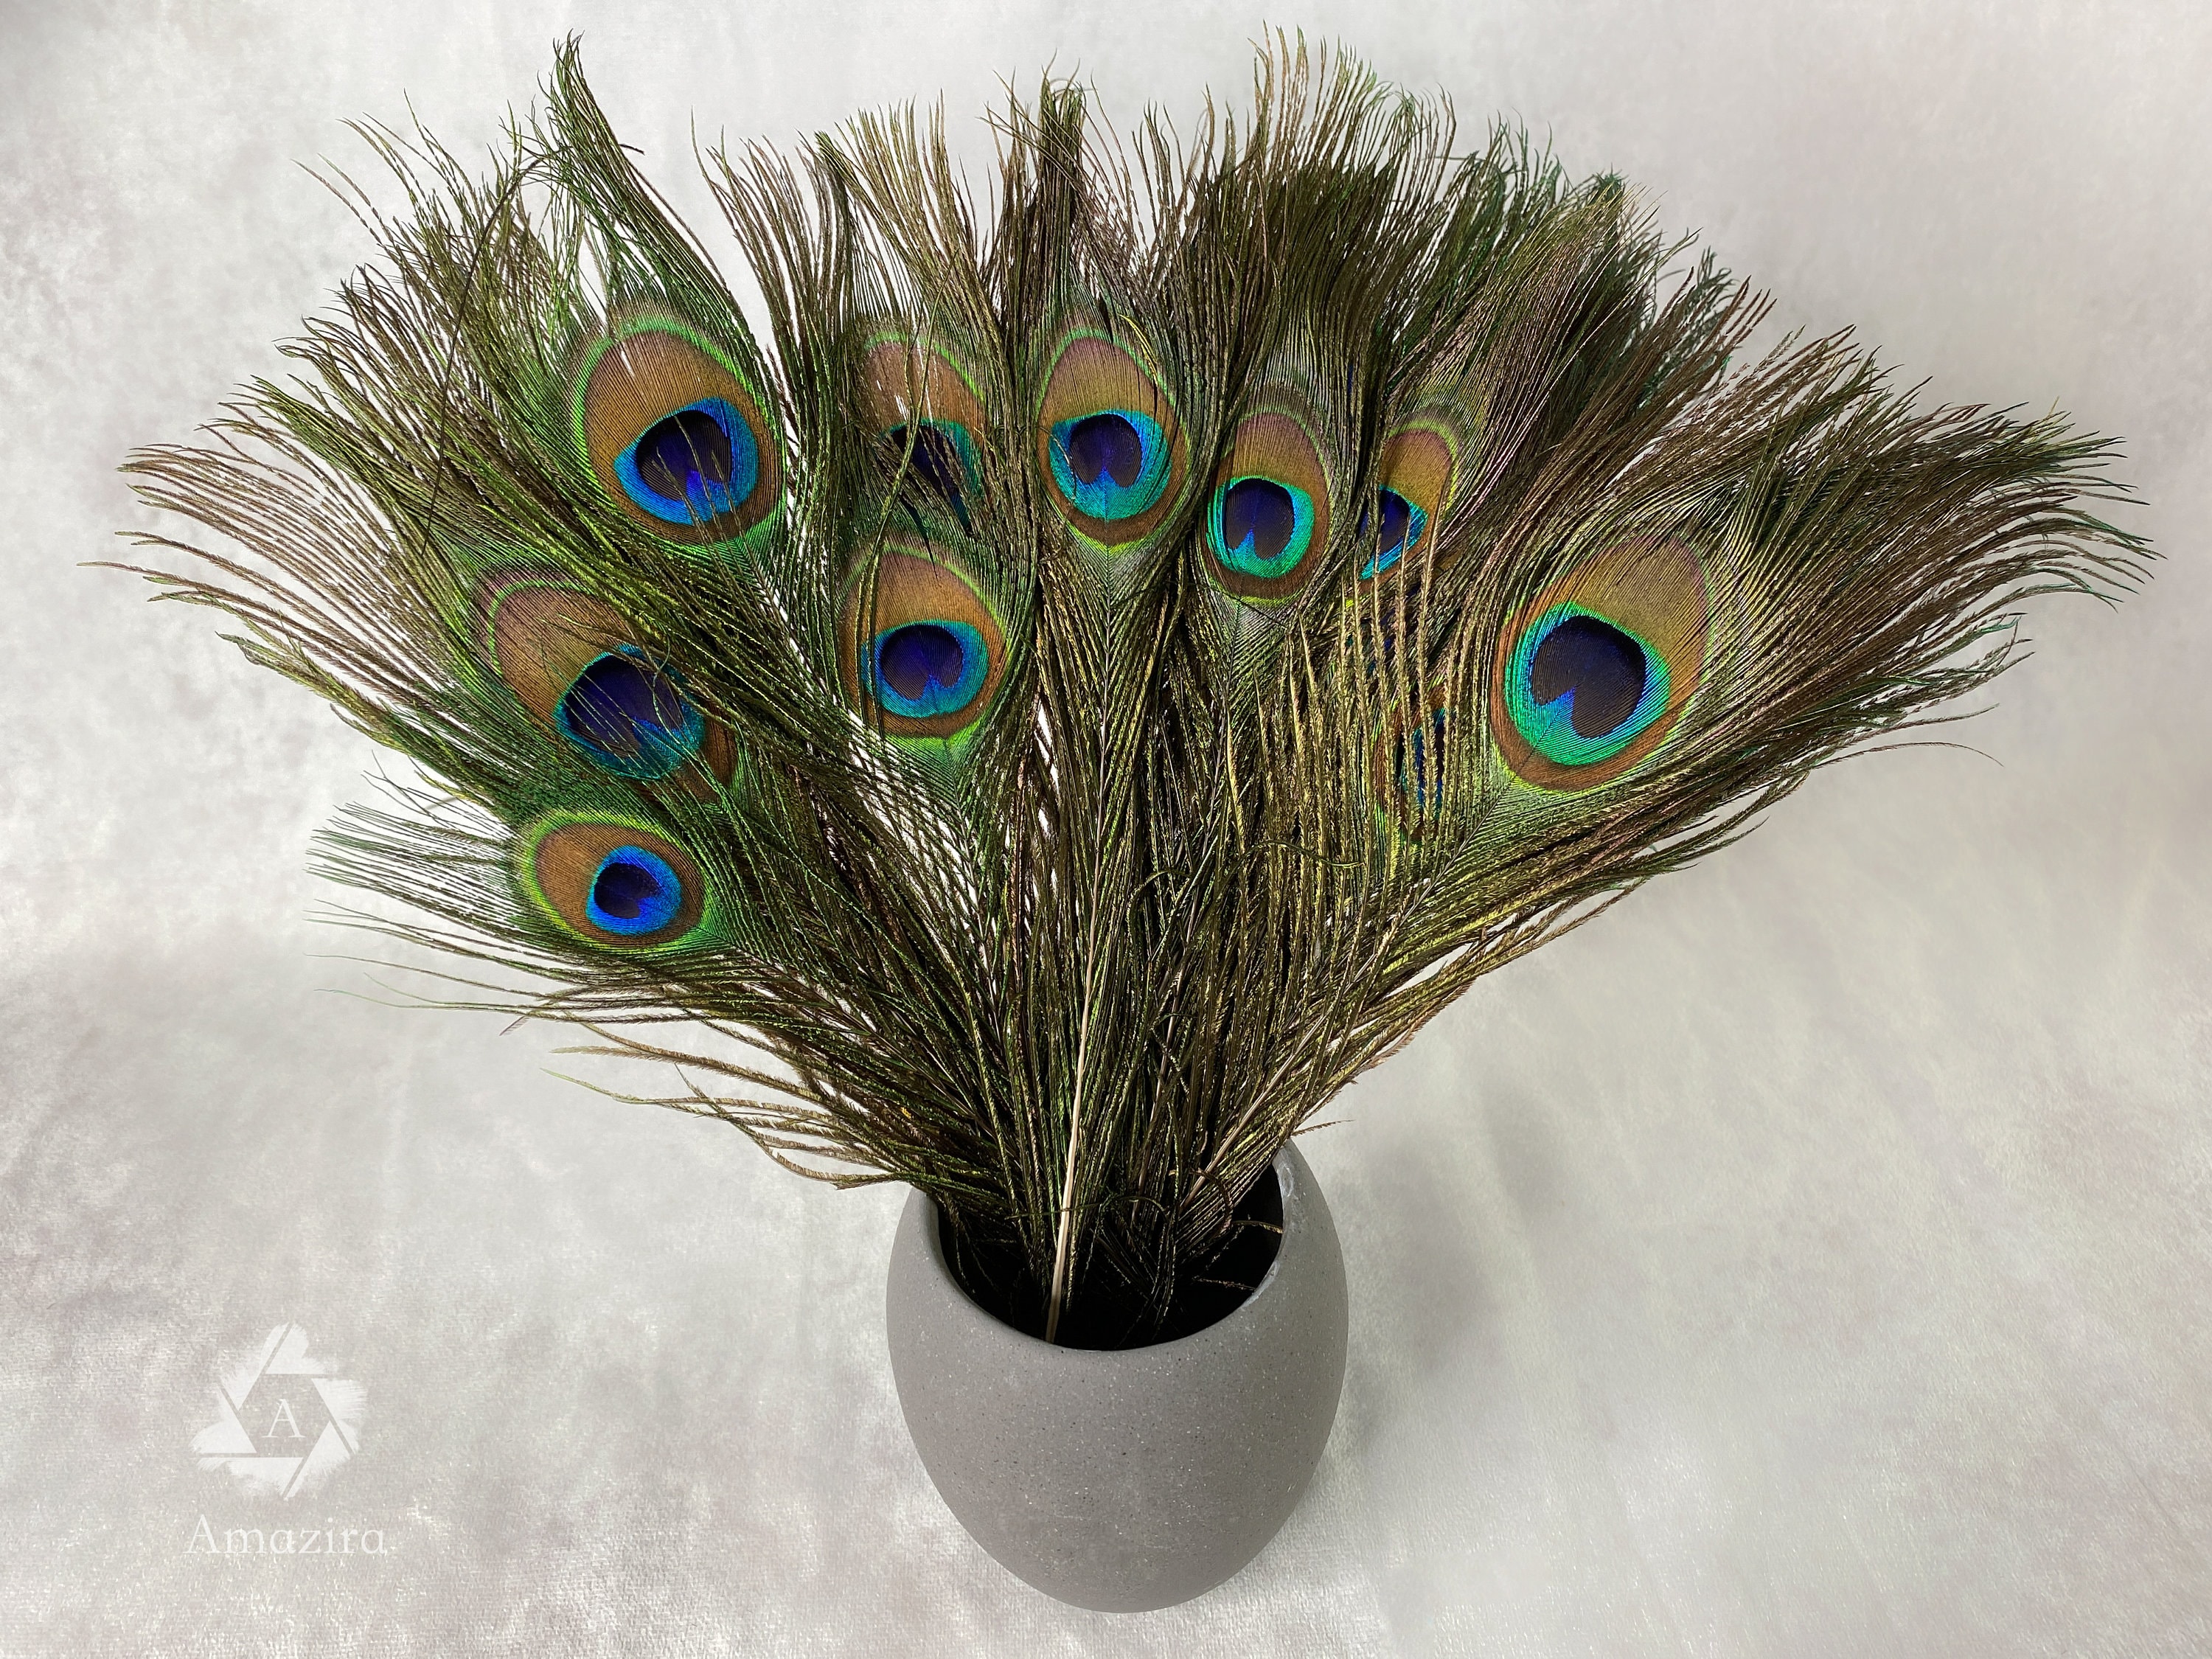 10pcs Long Natural Peacock Feathers 20-24 for Tall Vases Home Decorations  Christmas Decor